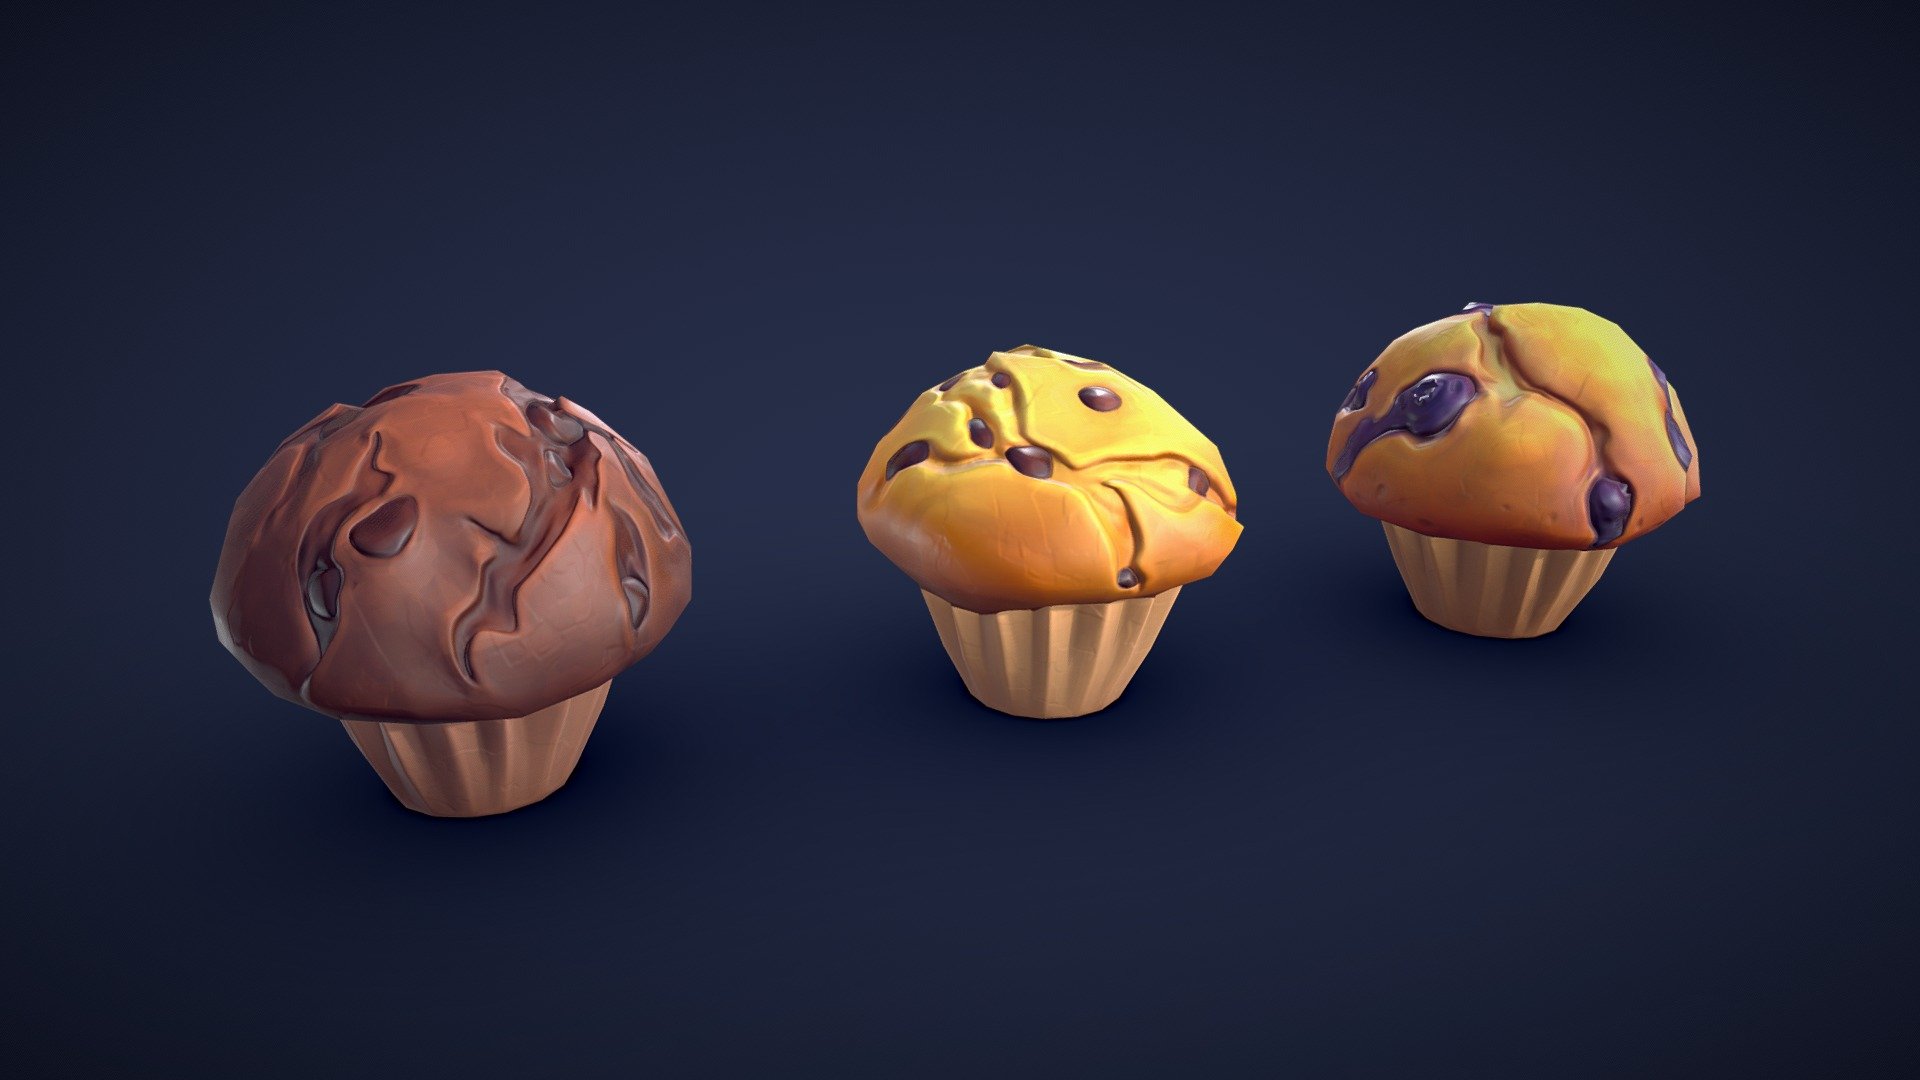 This pack includes 3 different stylized muffins: chocolate, blueberry and chocolate chip.
Whether you want to create a cozy bakery, a fancy café, or a chaotic food fight, this 3D stylized muffin asset pack will make your scenes more appetizing and fun! 🧁

Model information:




Optimized low-poly assets for real-time usage.

Optimized and clean UV mapping.

2K and 4K textures for the assets are included.

Compatible with Unreal Engine, Unity and similar engines.

All assets are included in a separate file as well.
 - Stylized Muffins - Low Poly - Buy Royalty Free 3D model by Lars Korden (@Lark.Art) 3d model